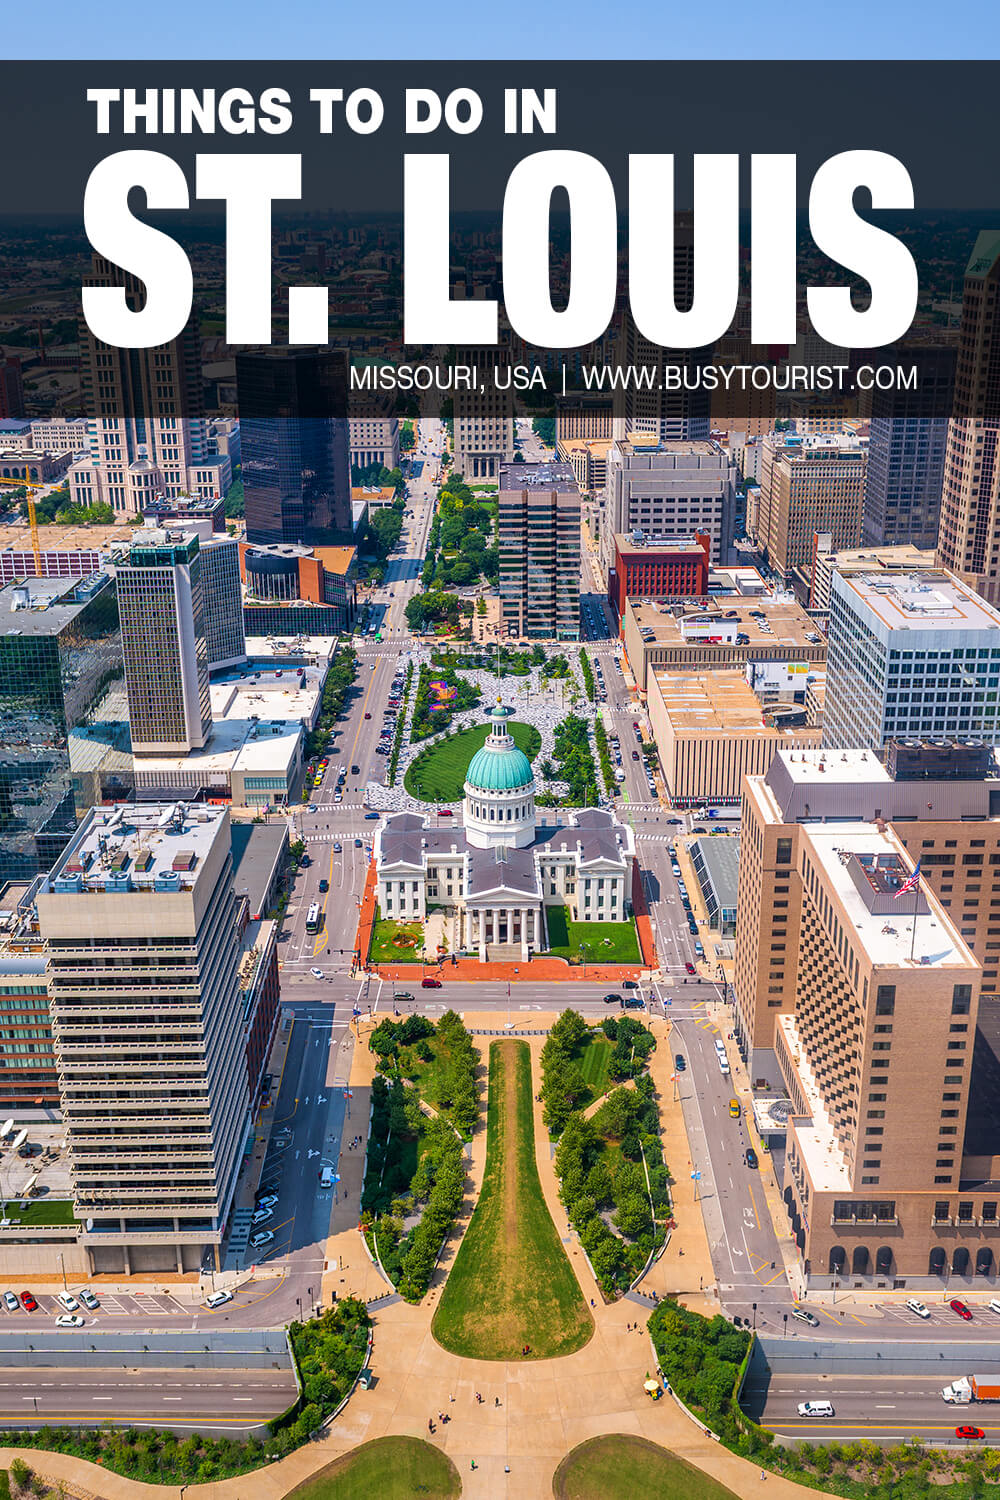 28 Fun Things To Do In St. Louis (Missouri) Attractions & Activities